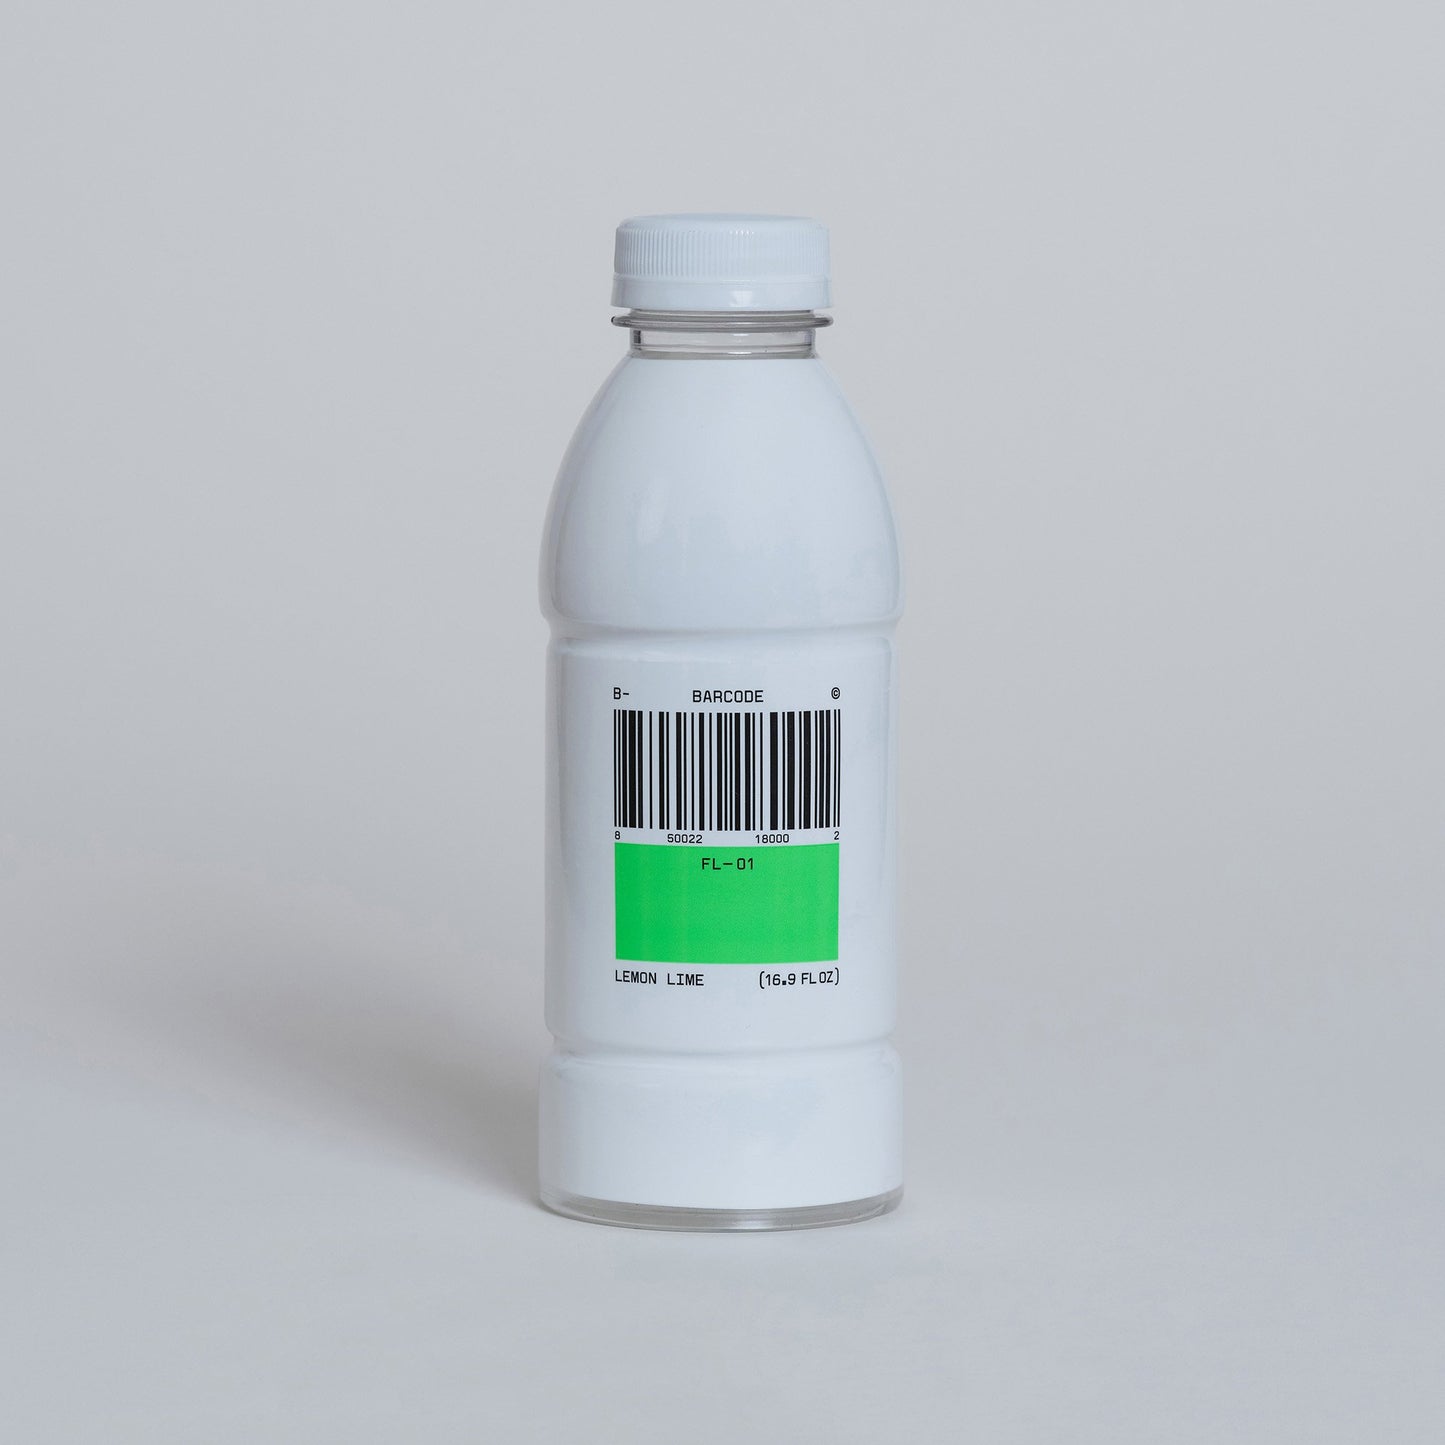 Drink Barcode - 12-pack